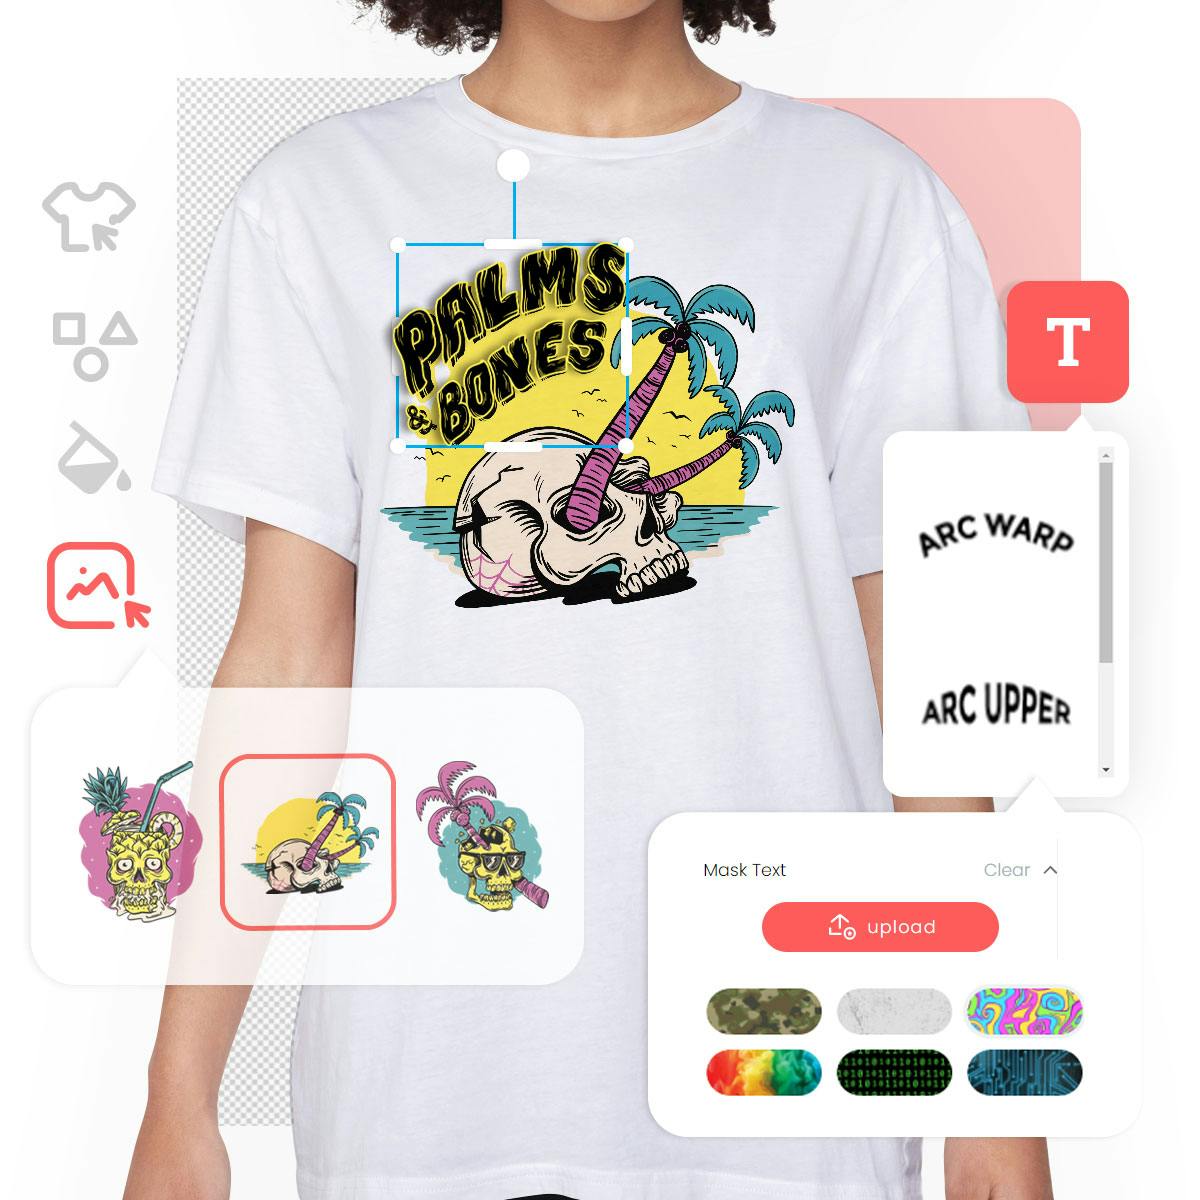 t-shirt maker preview with tools